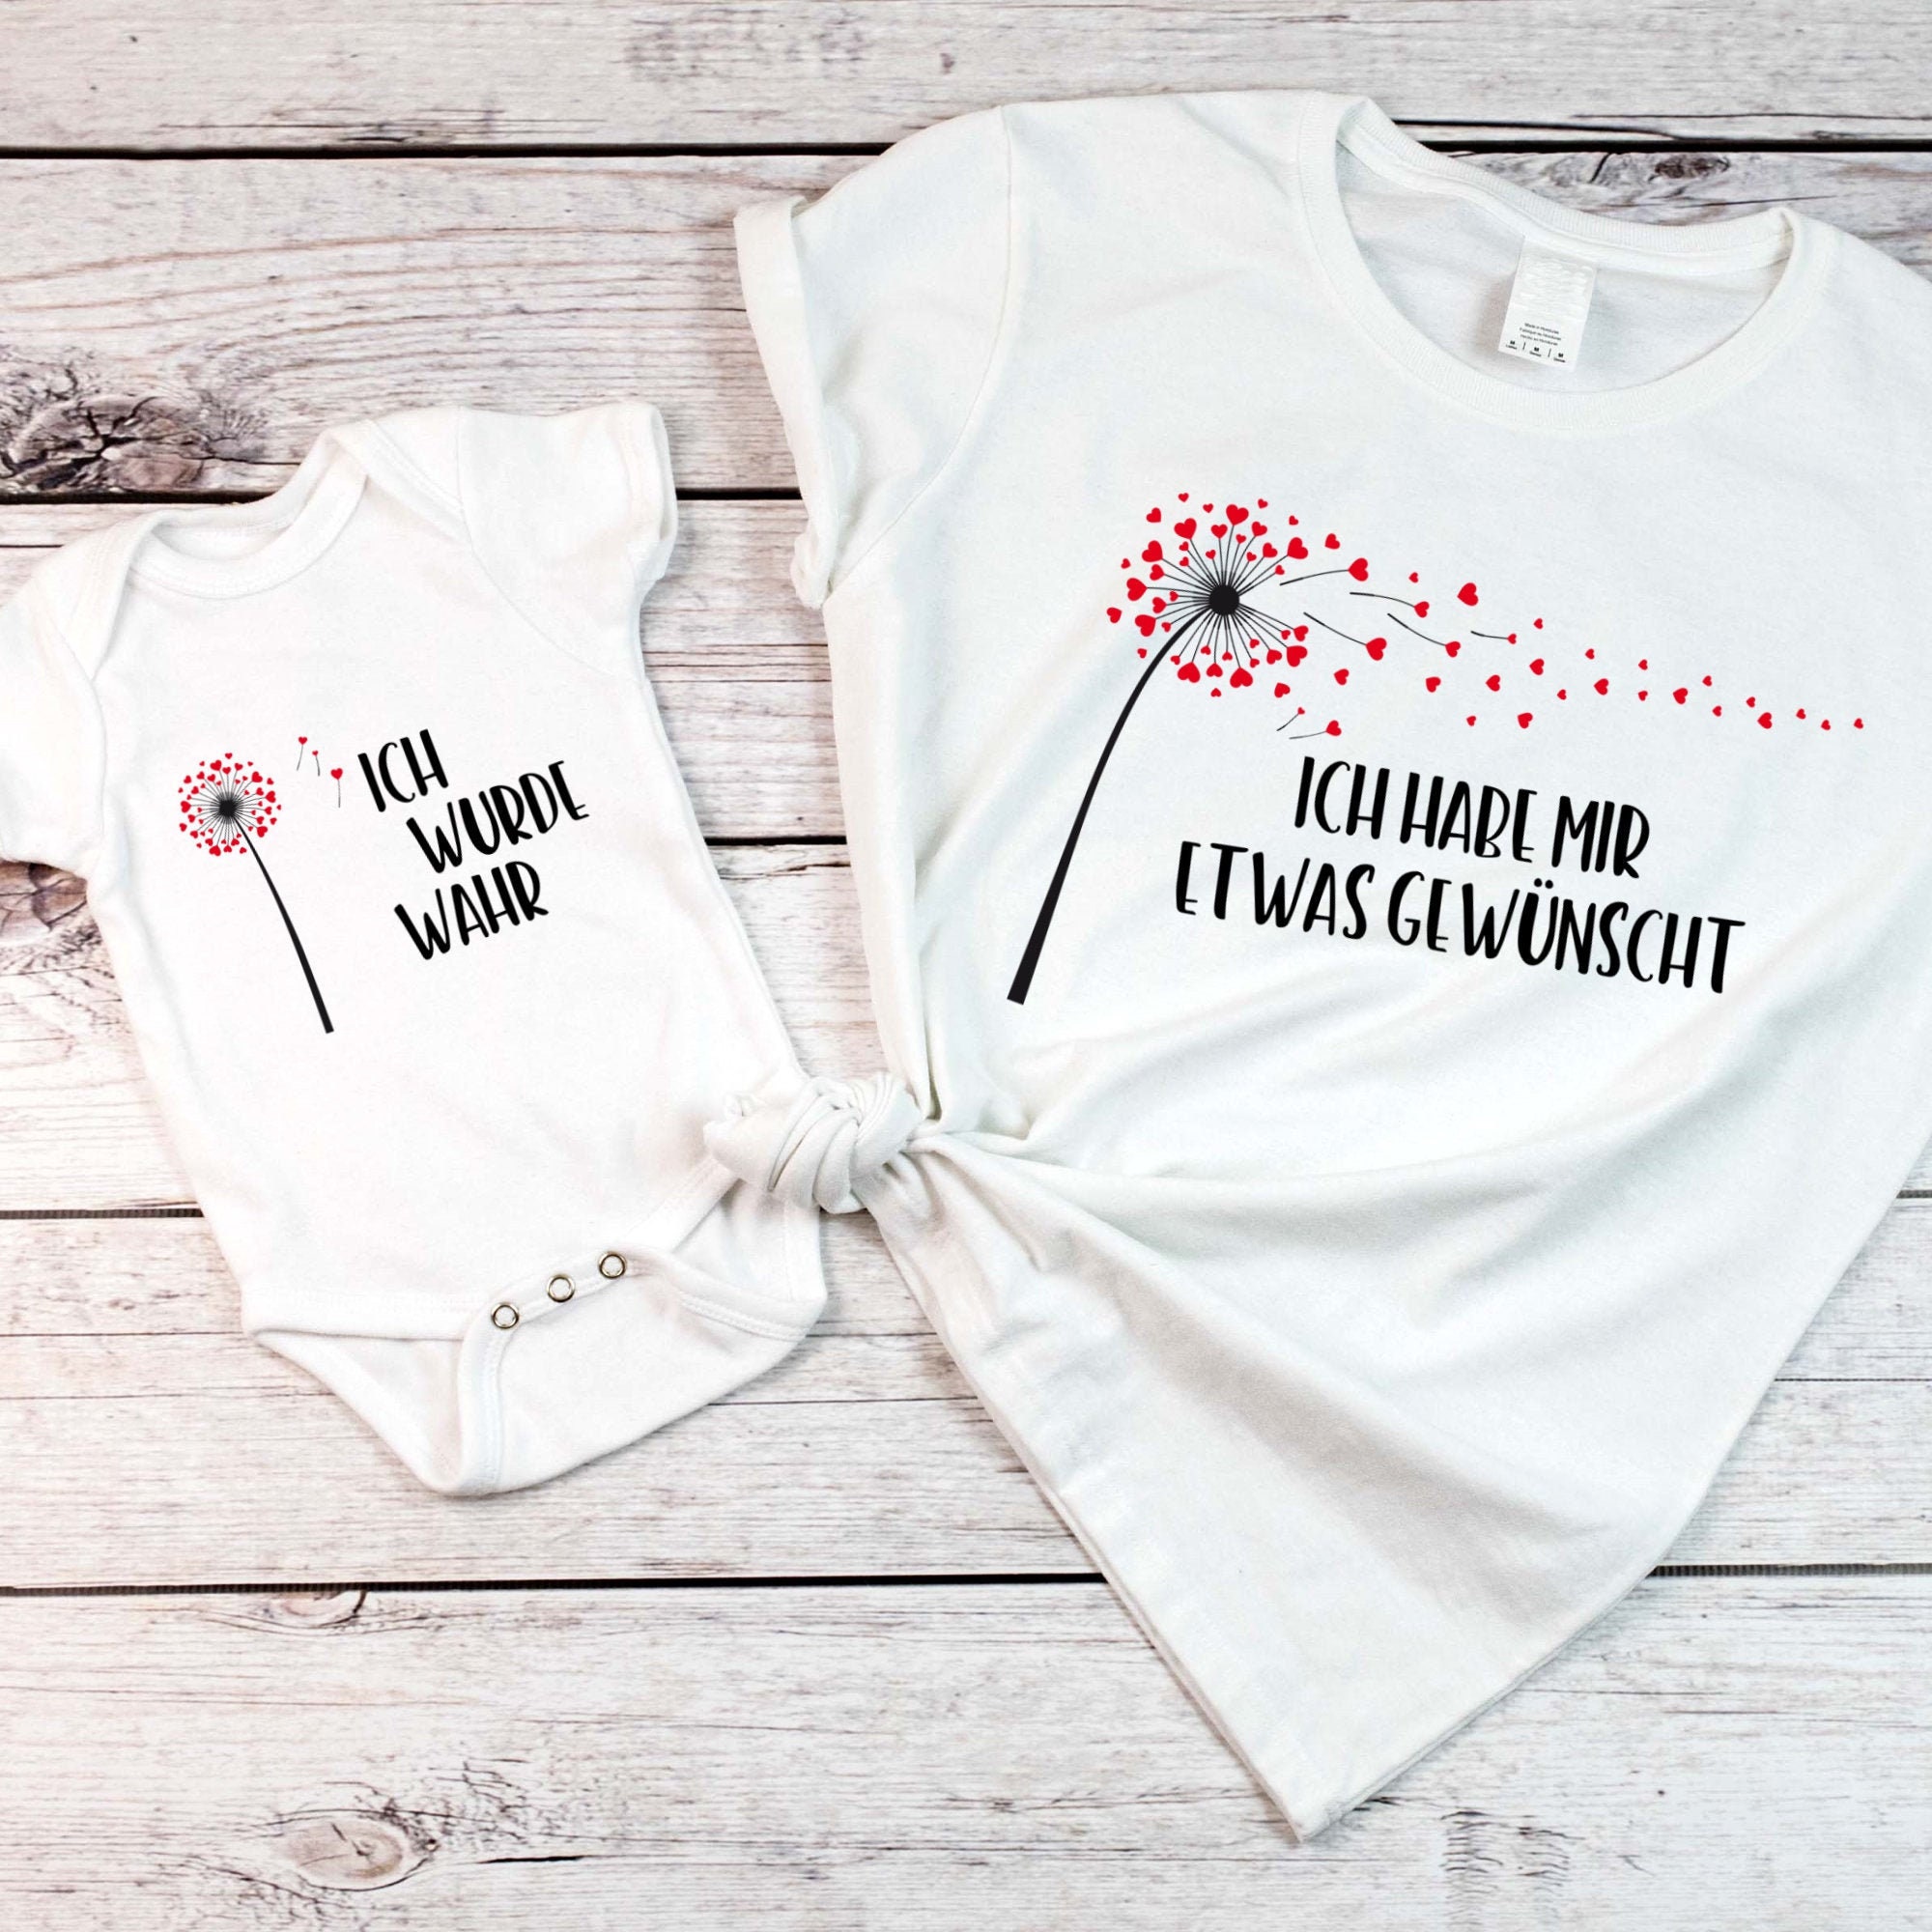 Mama Tochter Partnerlook T-shirt / Mama Tochter Outfit Mit - Etsy